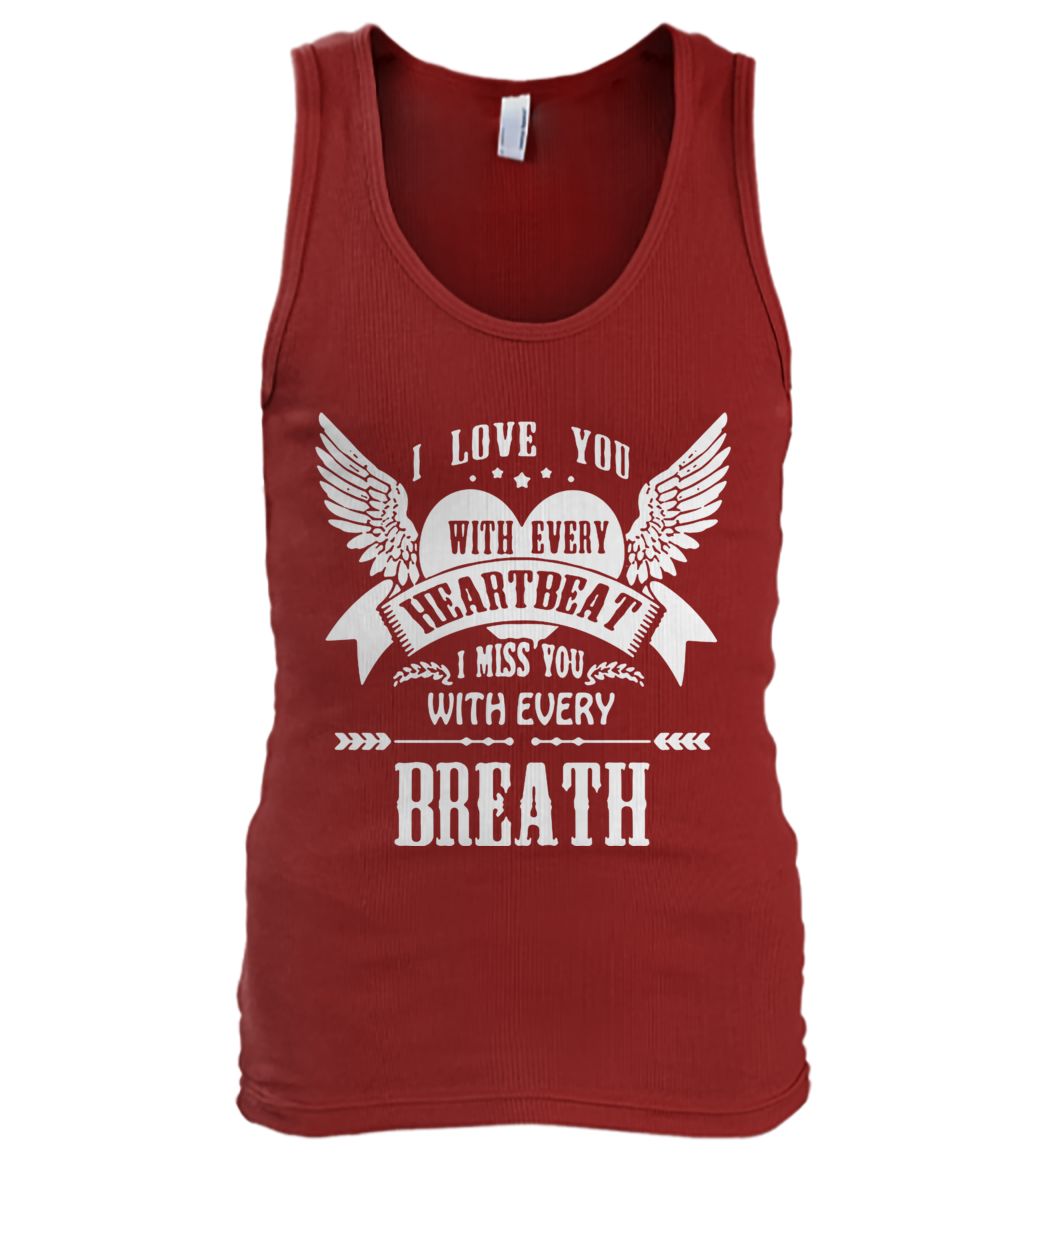 I love you with every heartbeat I miss you with every breath men's tank top